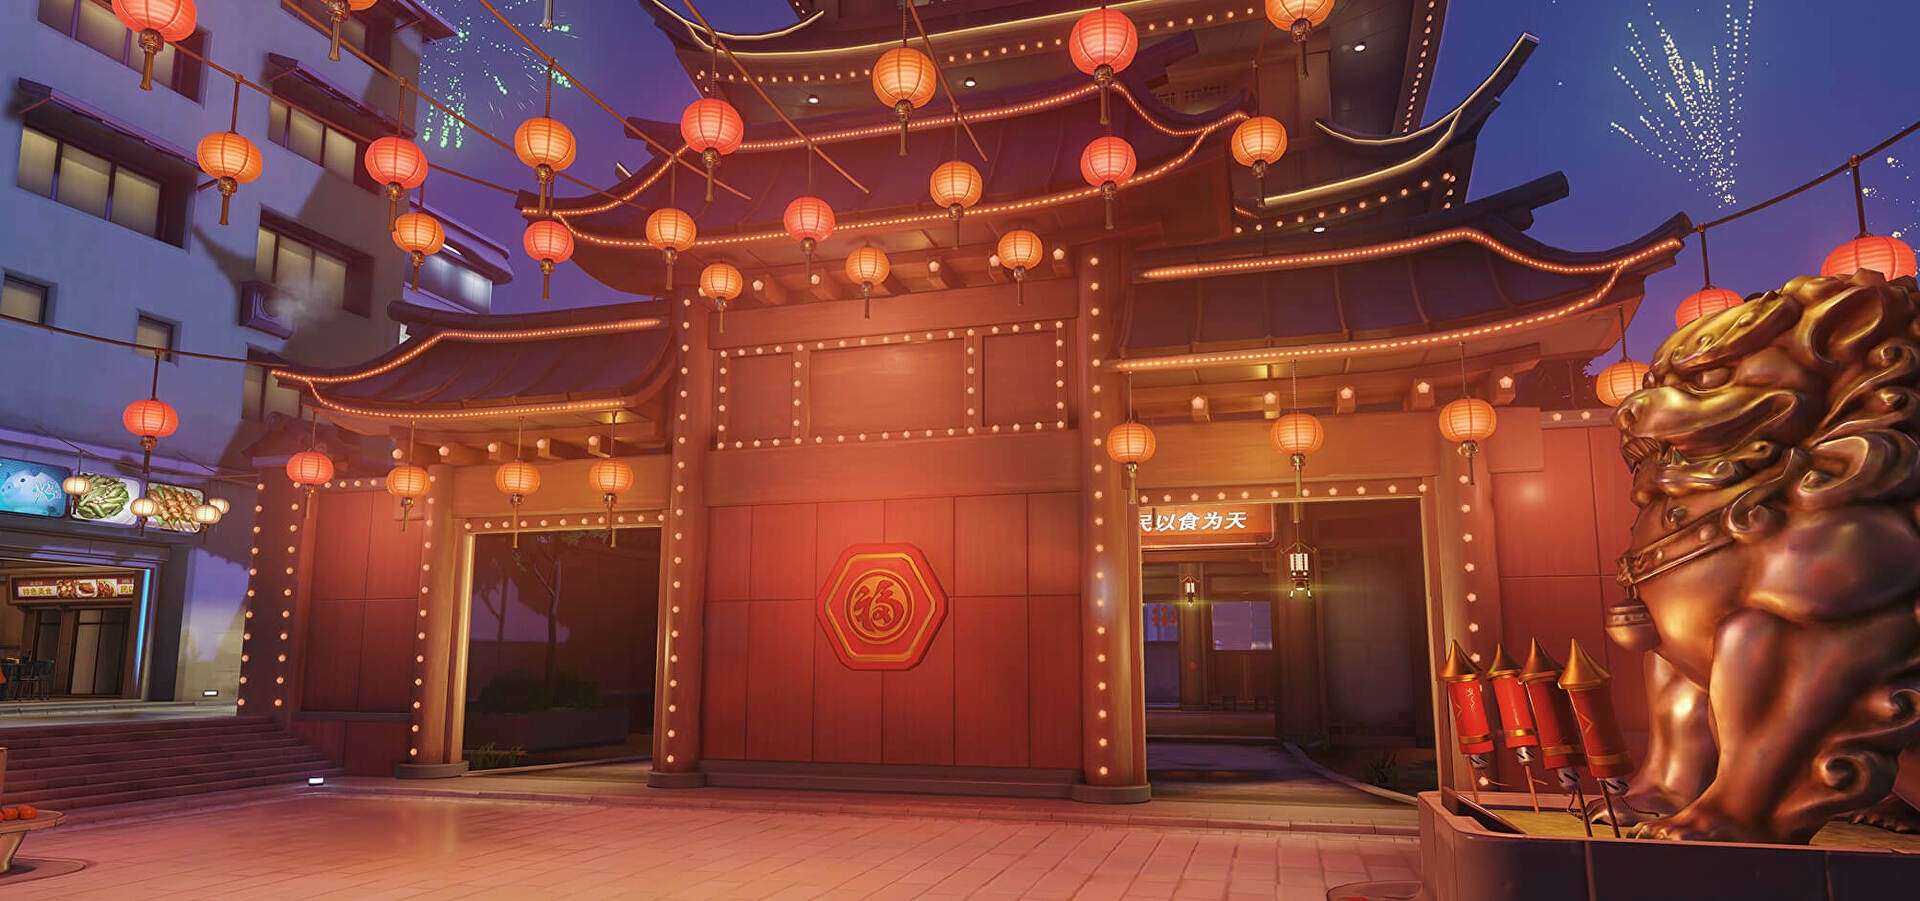 Overwatch map during Lunar new year